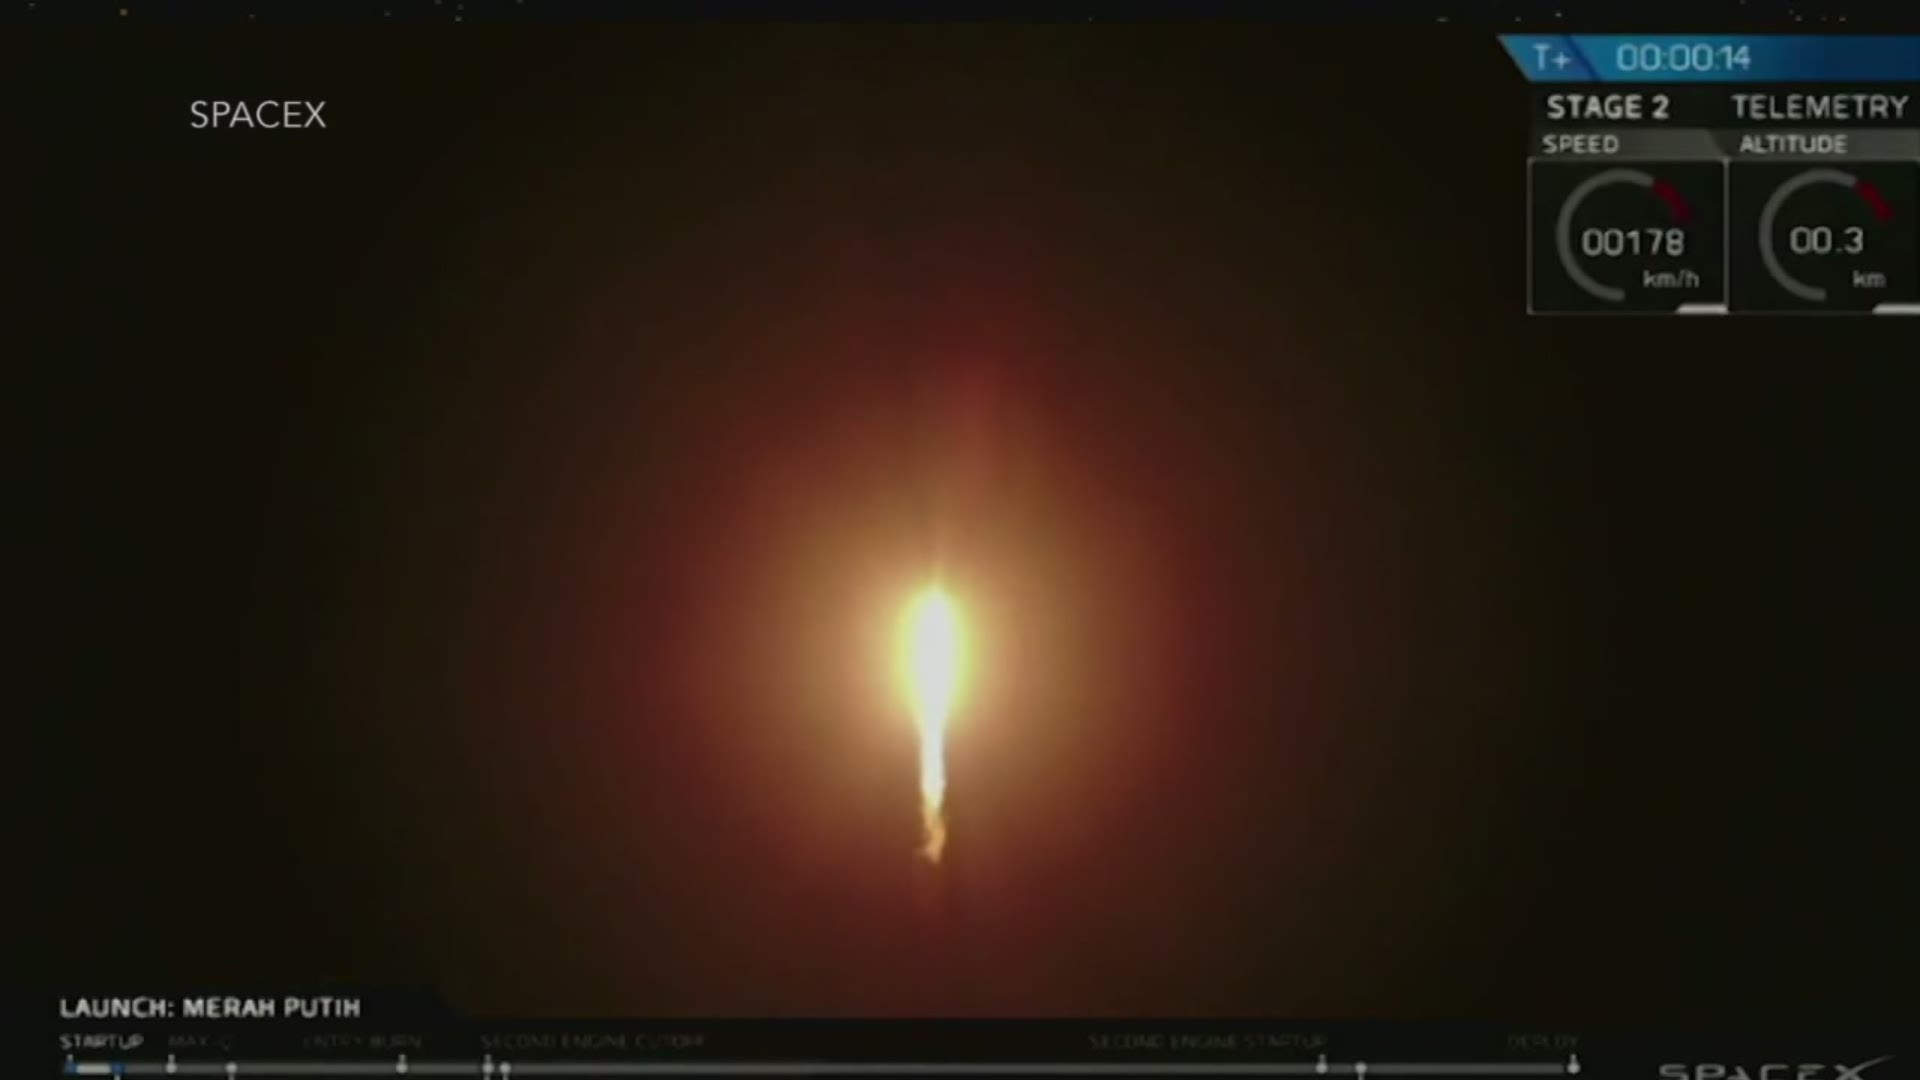 A SpaceX Falcon 9 rocket launched from Cape Canaveral, Florida early Tuesday morning. The rocket's first stage returned to earth, landing on the "Of Course I Still Love You" drone ship in the Atlantic Ocean. (Space X via AP)